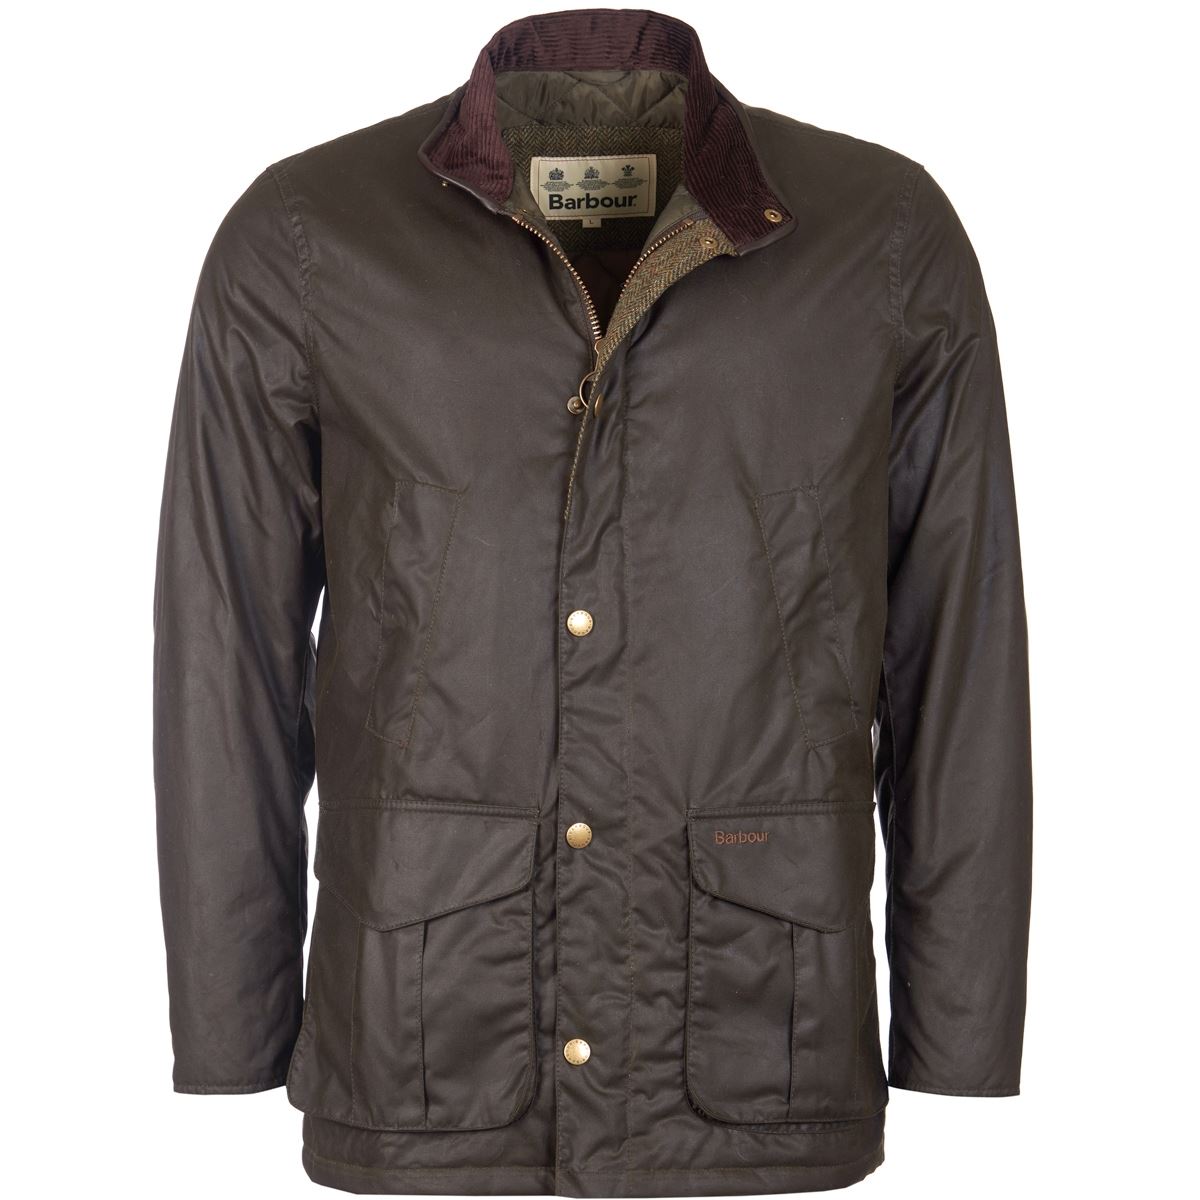 What material lines the barbour hereford jacket?